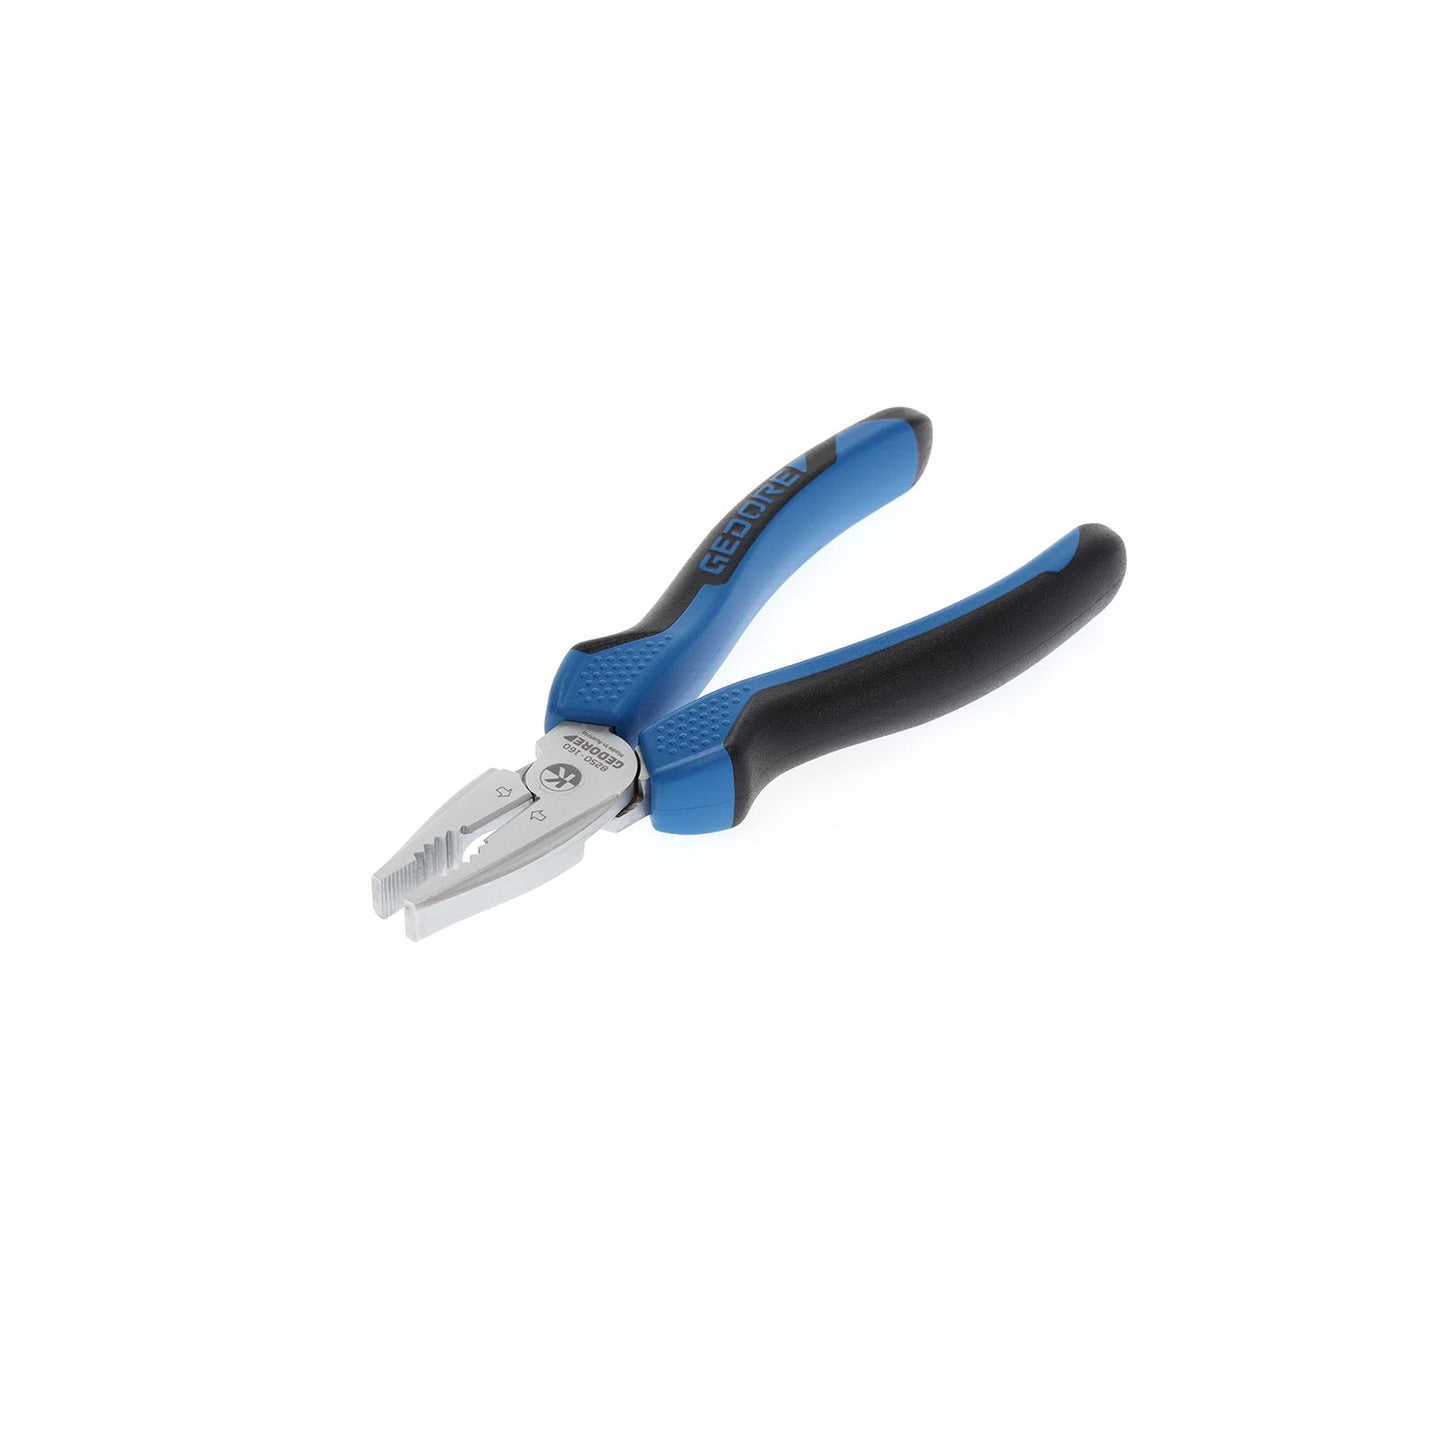 GEDORE 8250-160 JC - Universal force pliers 160 mm (1429566)